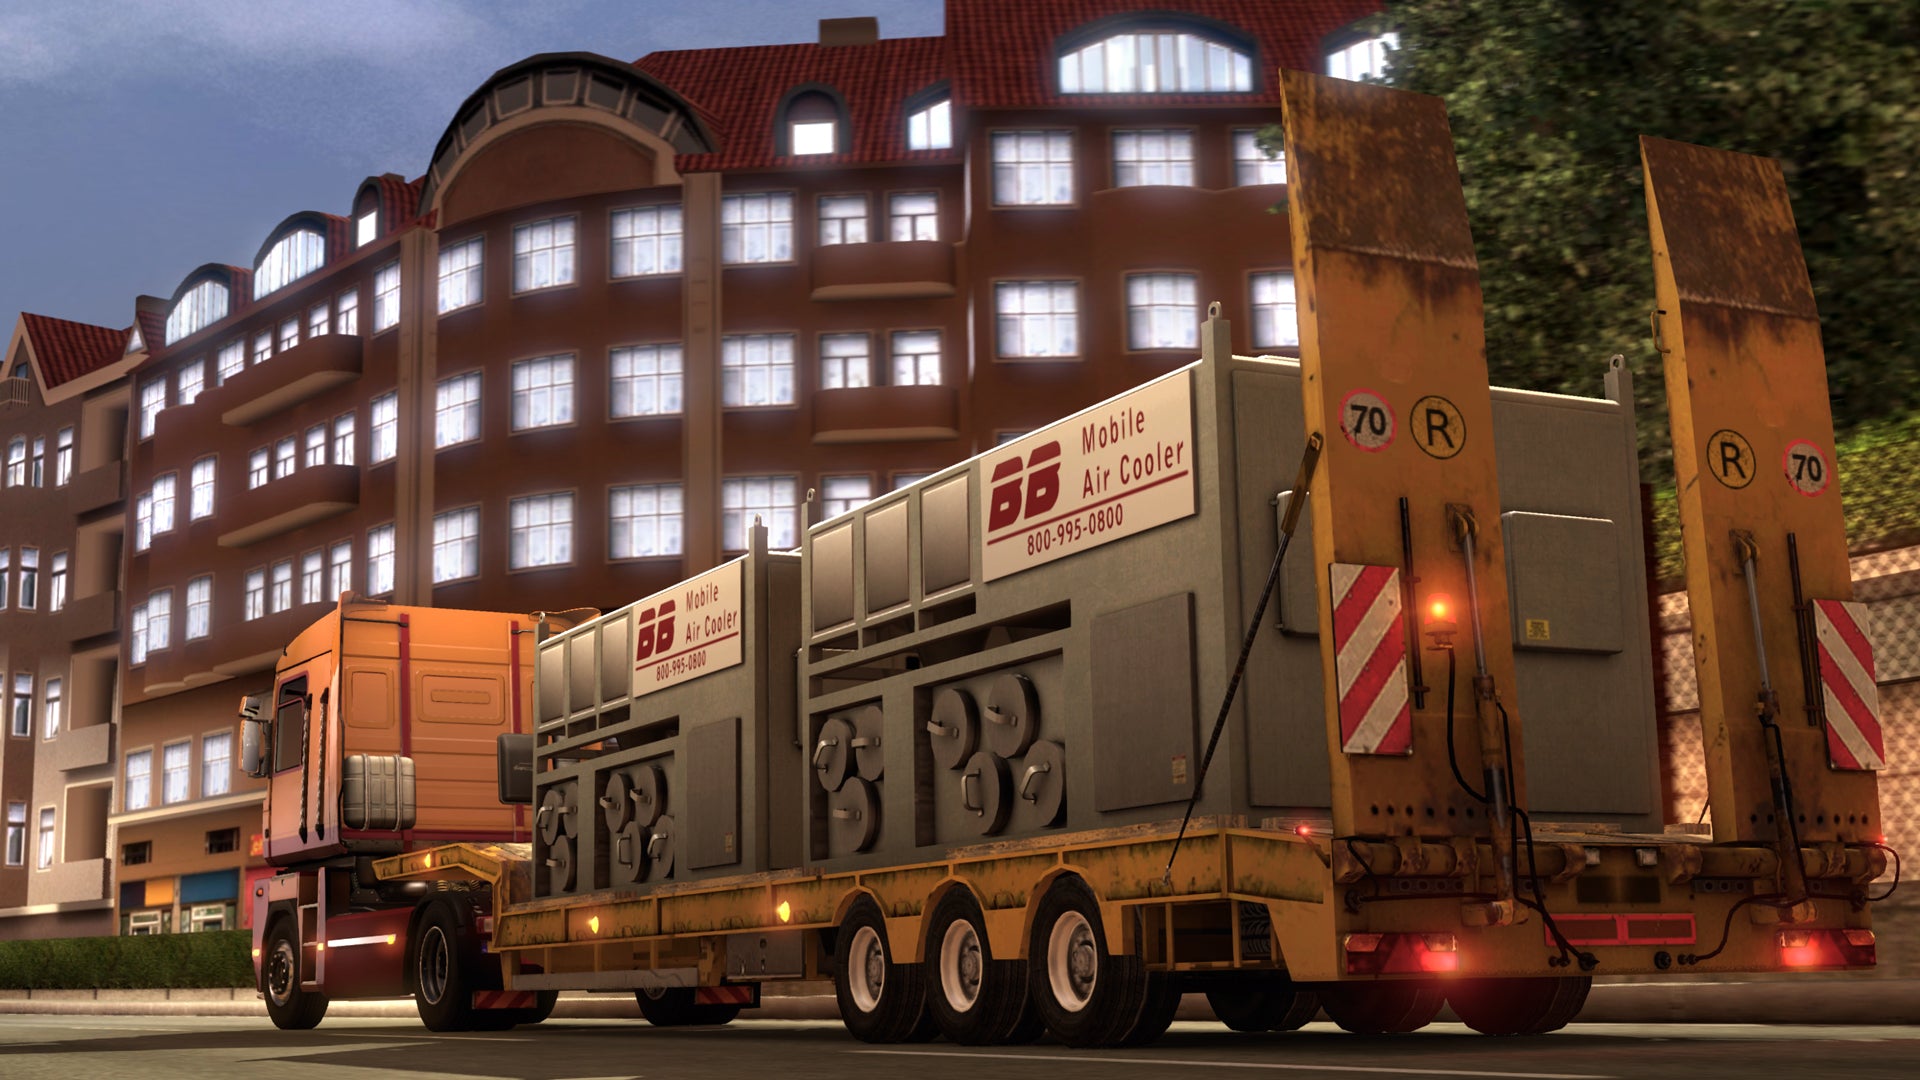 Euro Truck Simulator 2 PS4 Version Full Game Free Download - The Gamer HQ -  The Real Gaming Headquarters